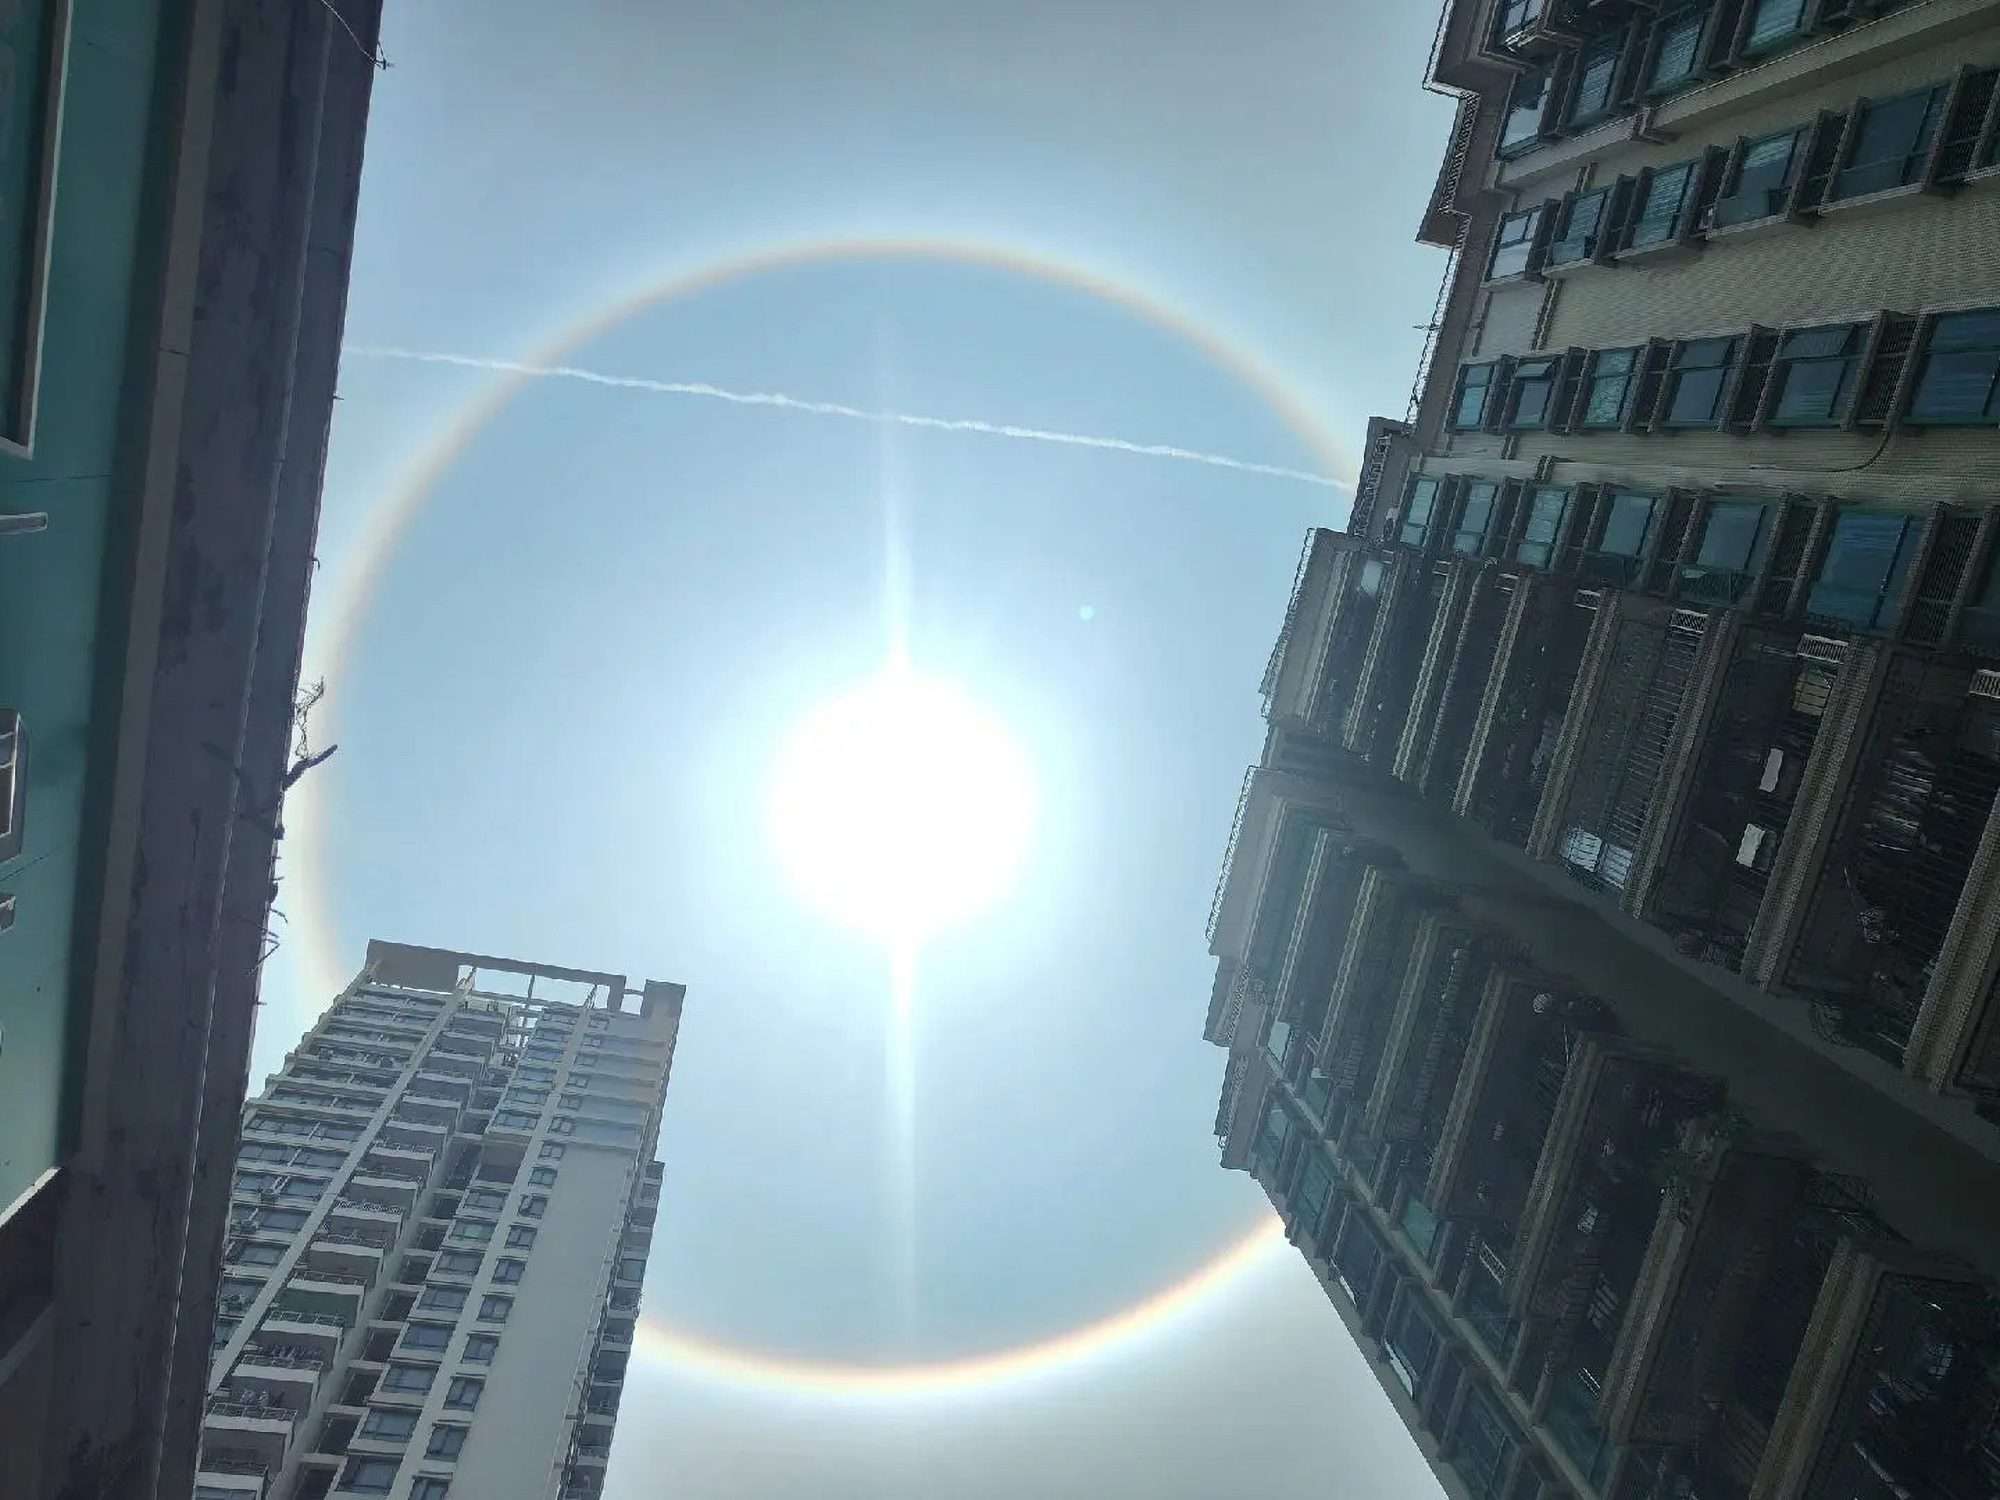 Day Of The Dragon Marked With Spectacular Solar Halo